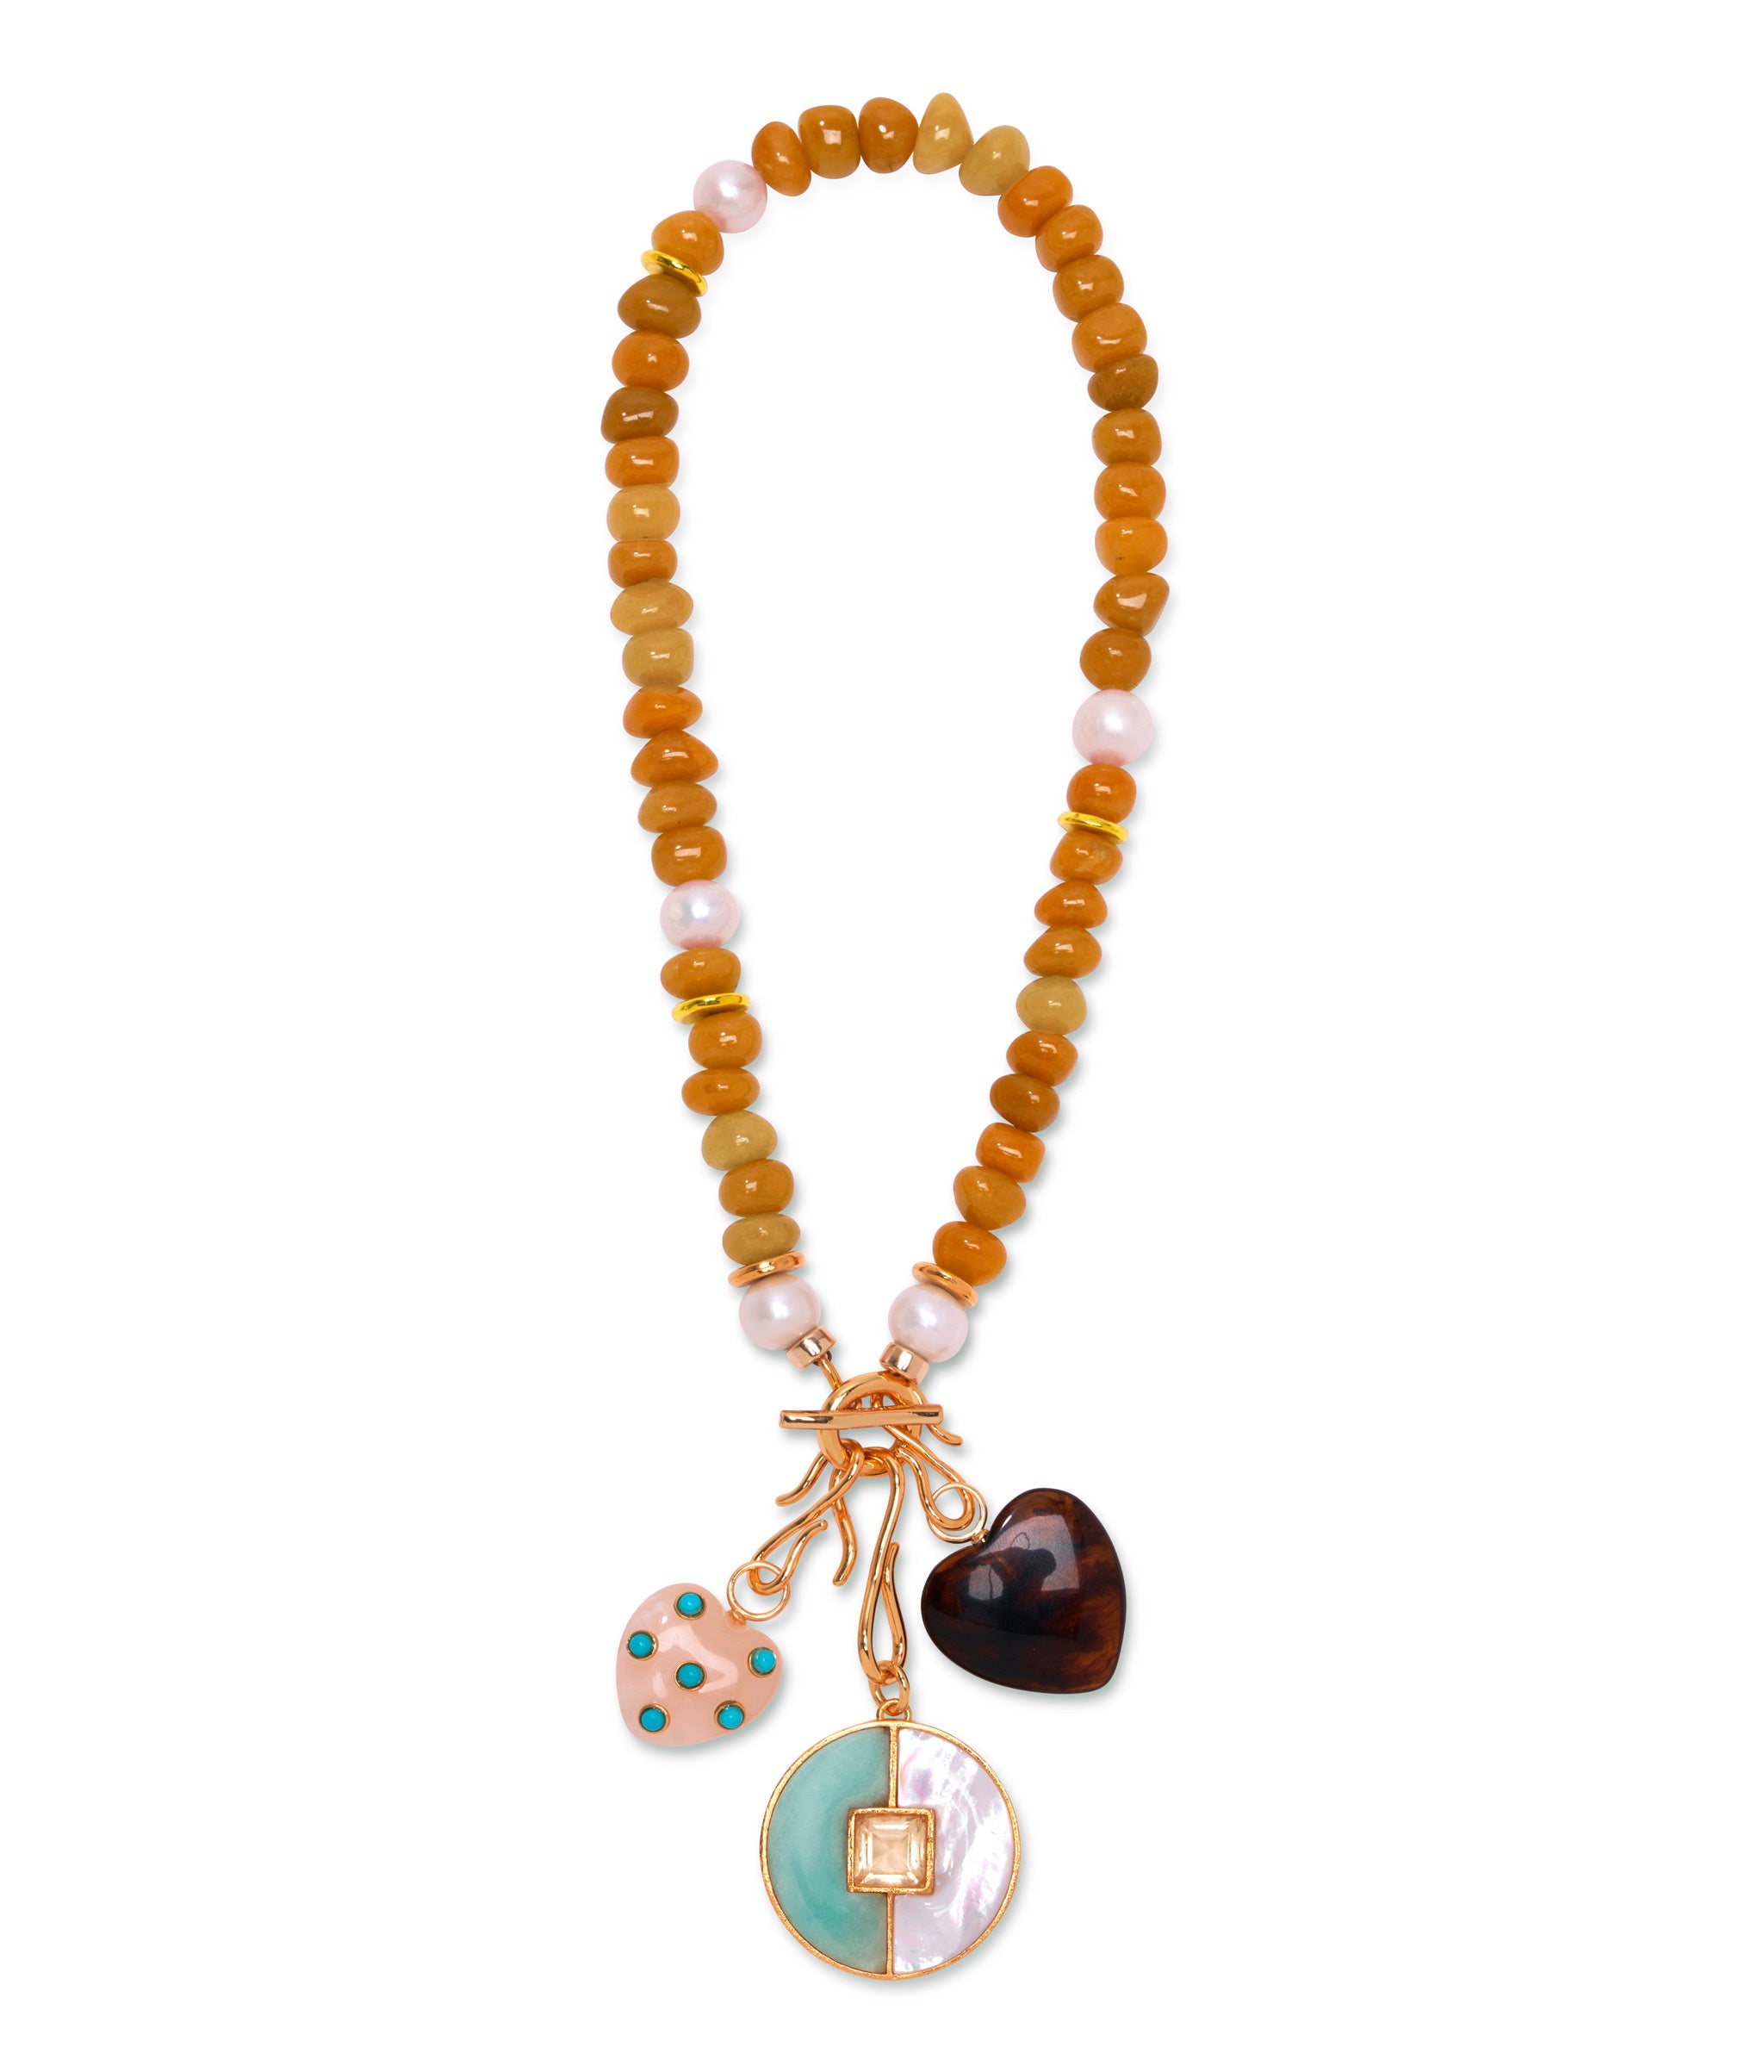 Mood Necklace in Red Aventurine with assorted charms.